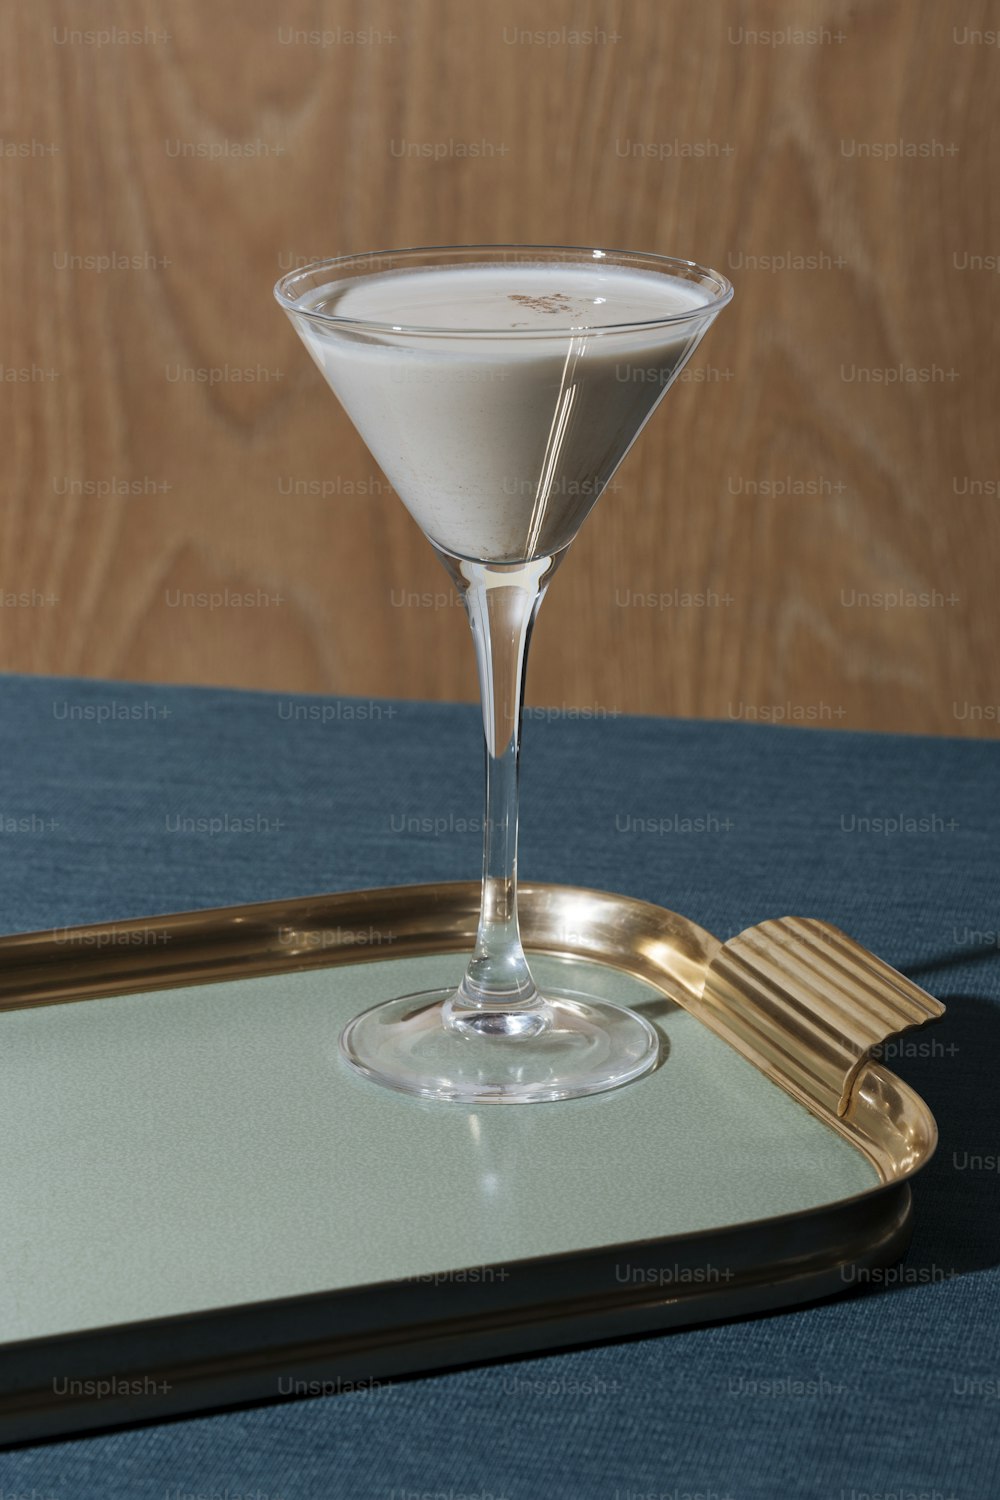 Shake all ingredients with ice and strain contents into a cocktail glass. Sprinkle nutmeg on top and serve.